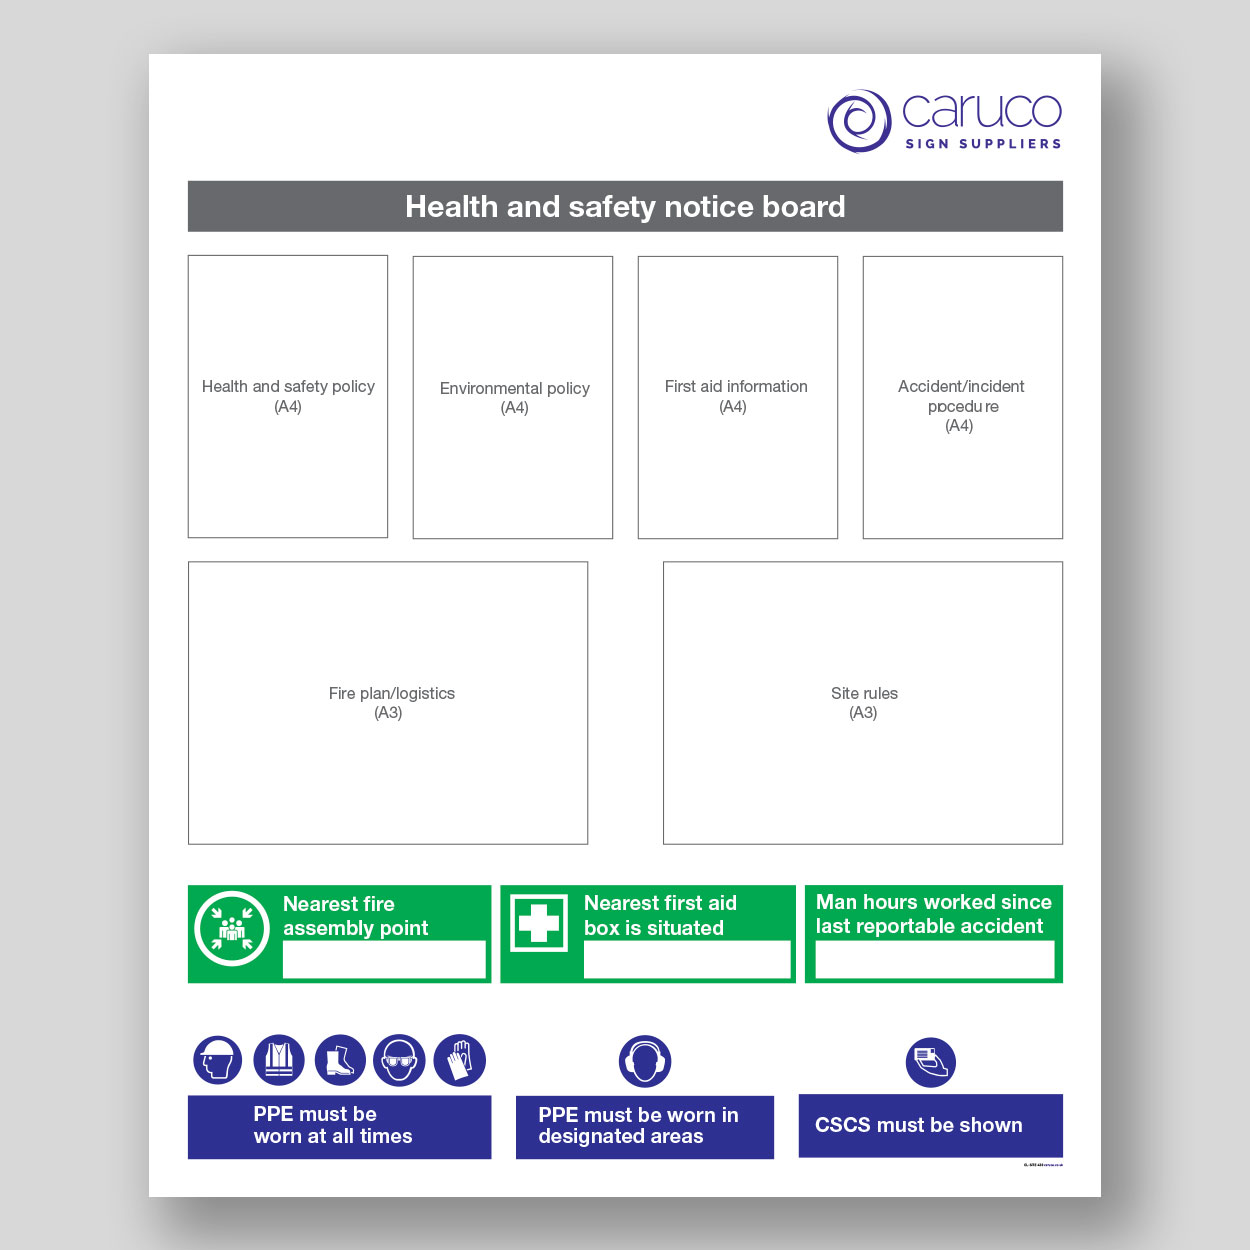 CL-SITE-400 Health and safety notice board